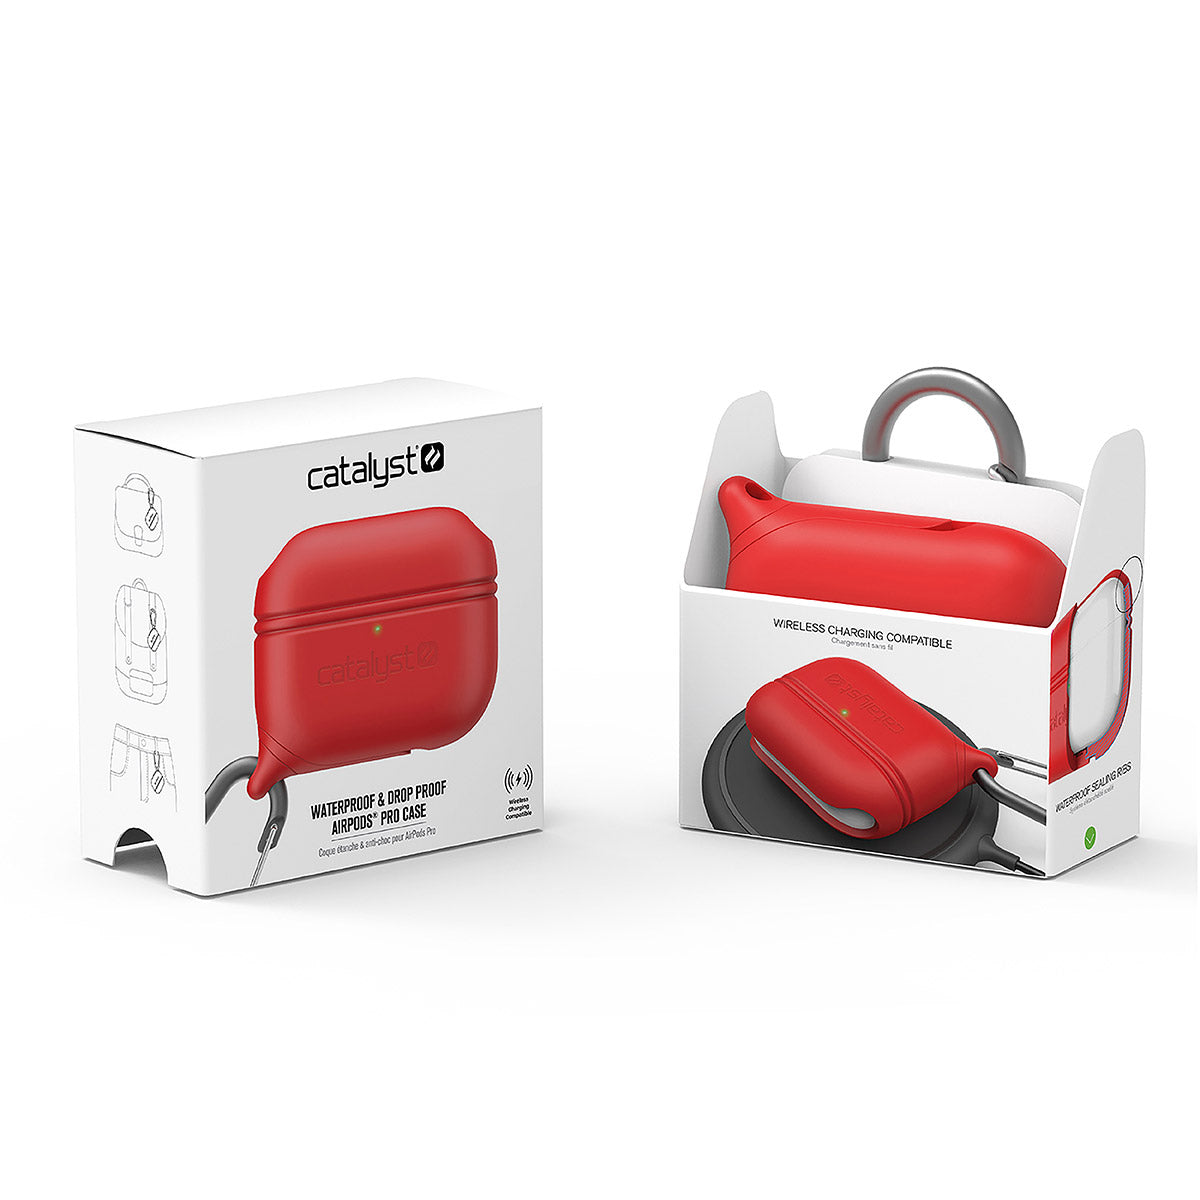 catalyst airpods pro gen 2 1 waterproof case carabiner special edition red packaging